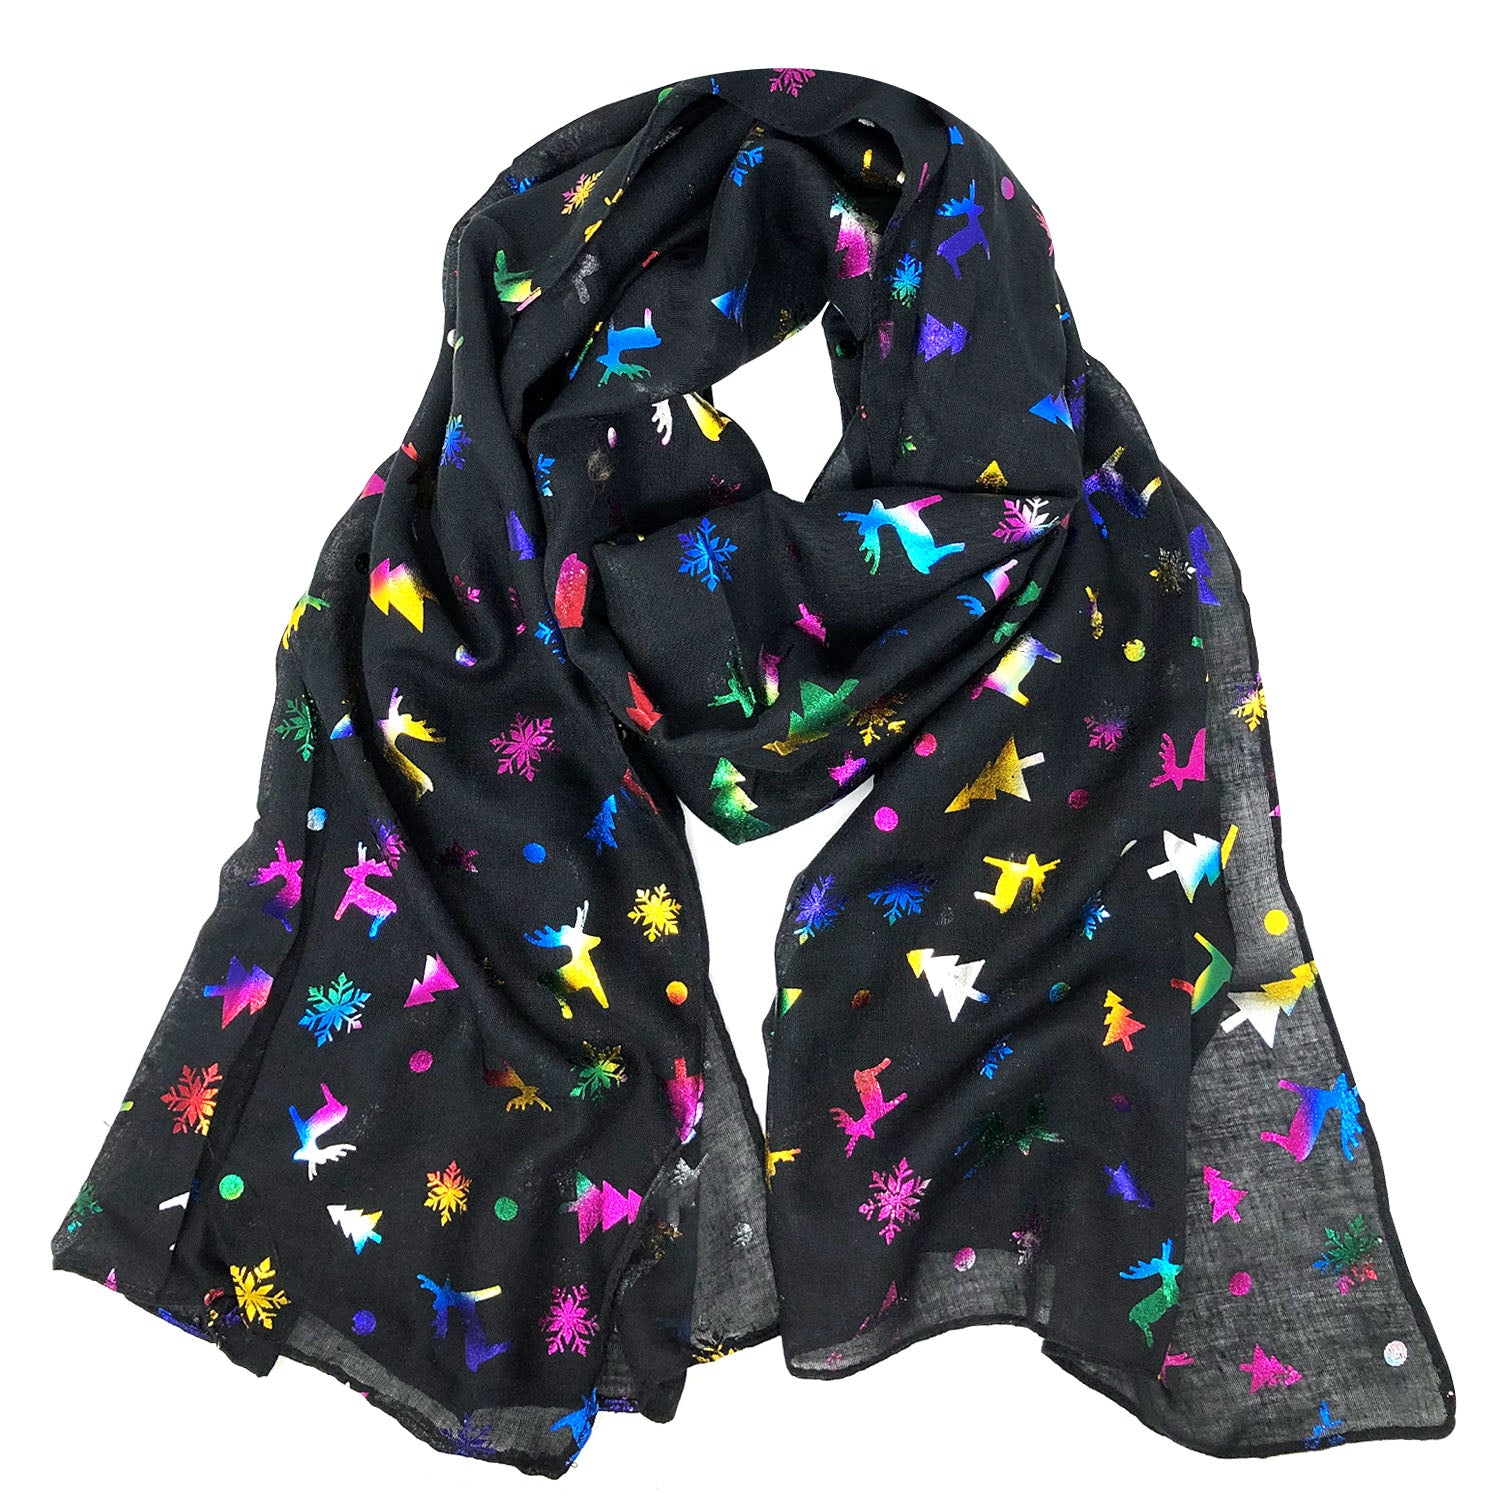  Silver Sequin Scarves Long Sequin Scarves Confetti Dot Scarves  Silver Scarves Women : Handmade Products